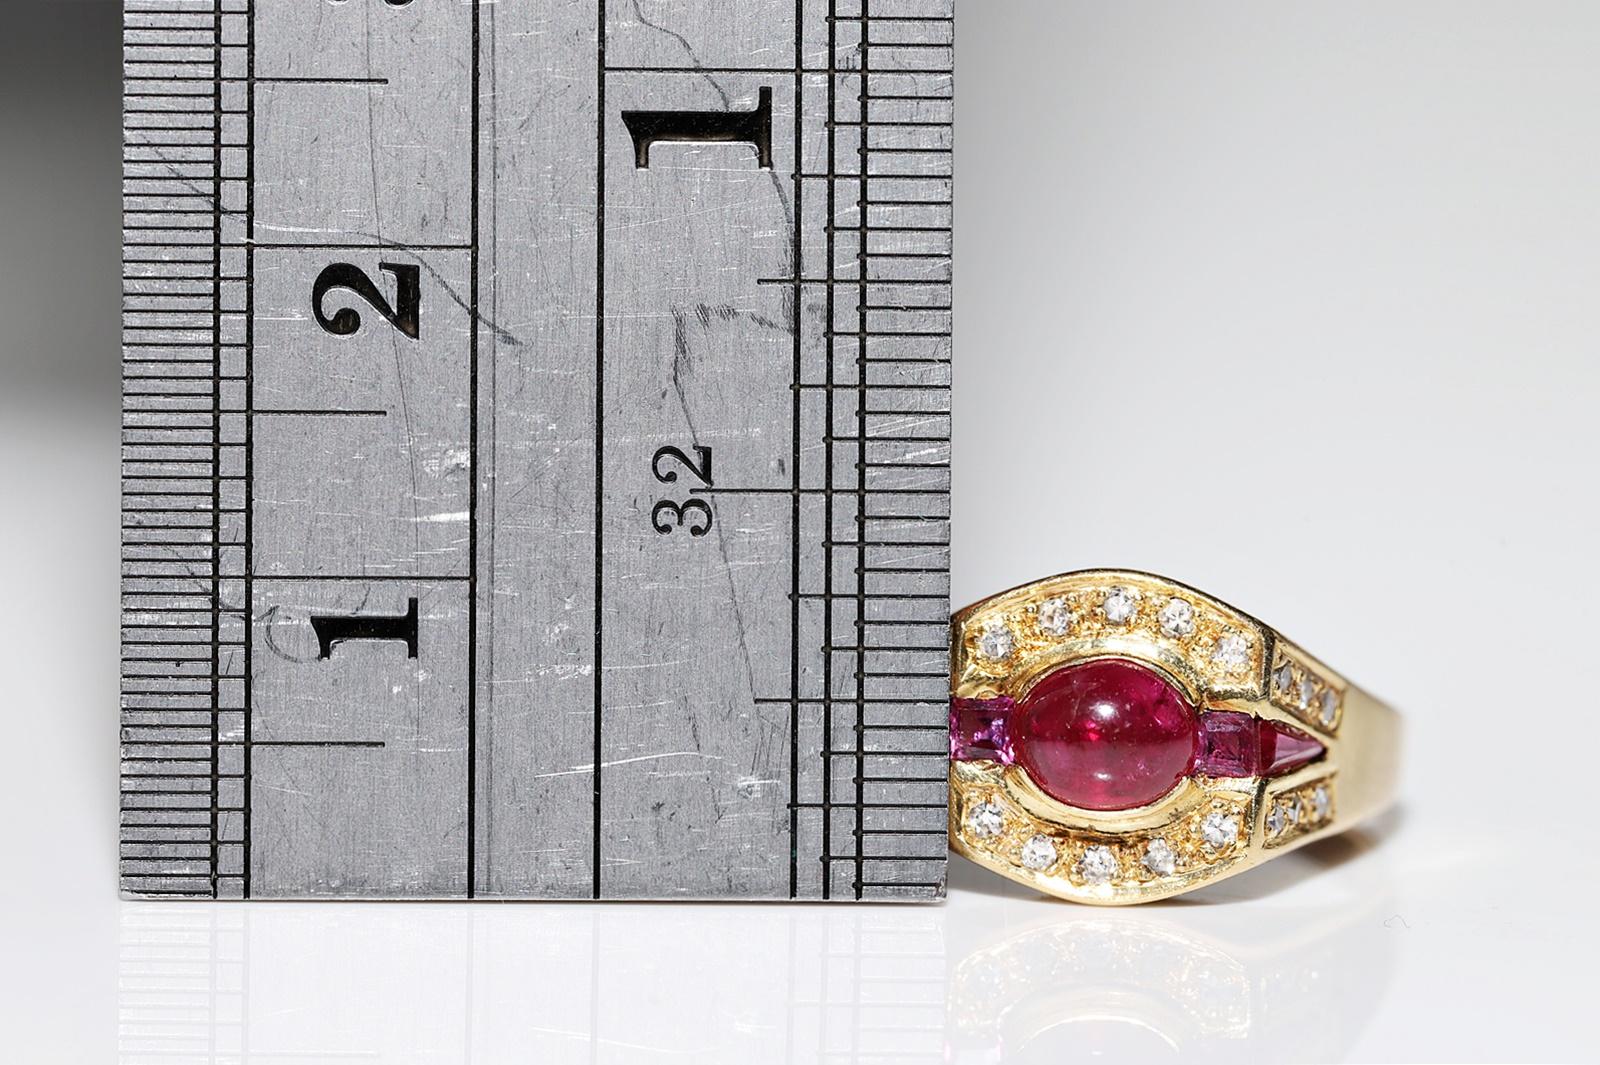 Vintage Circa 1980s 18k Gold Natural Diamond And Ruby Decorated Ring  For Sale 4